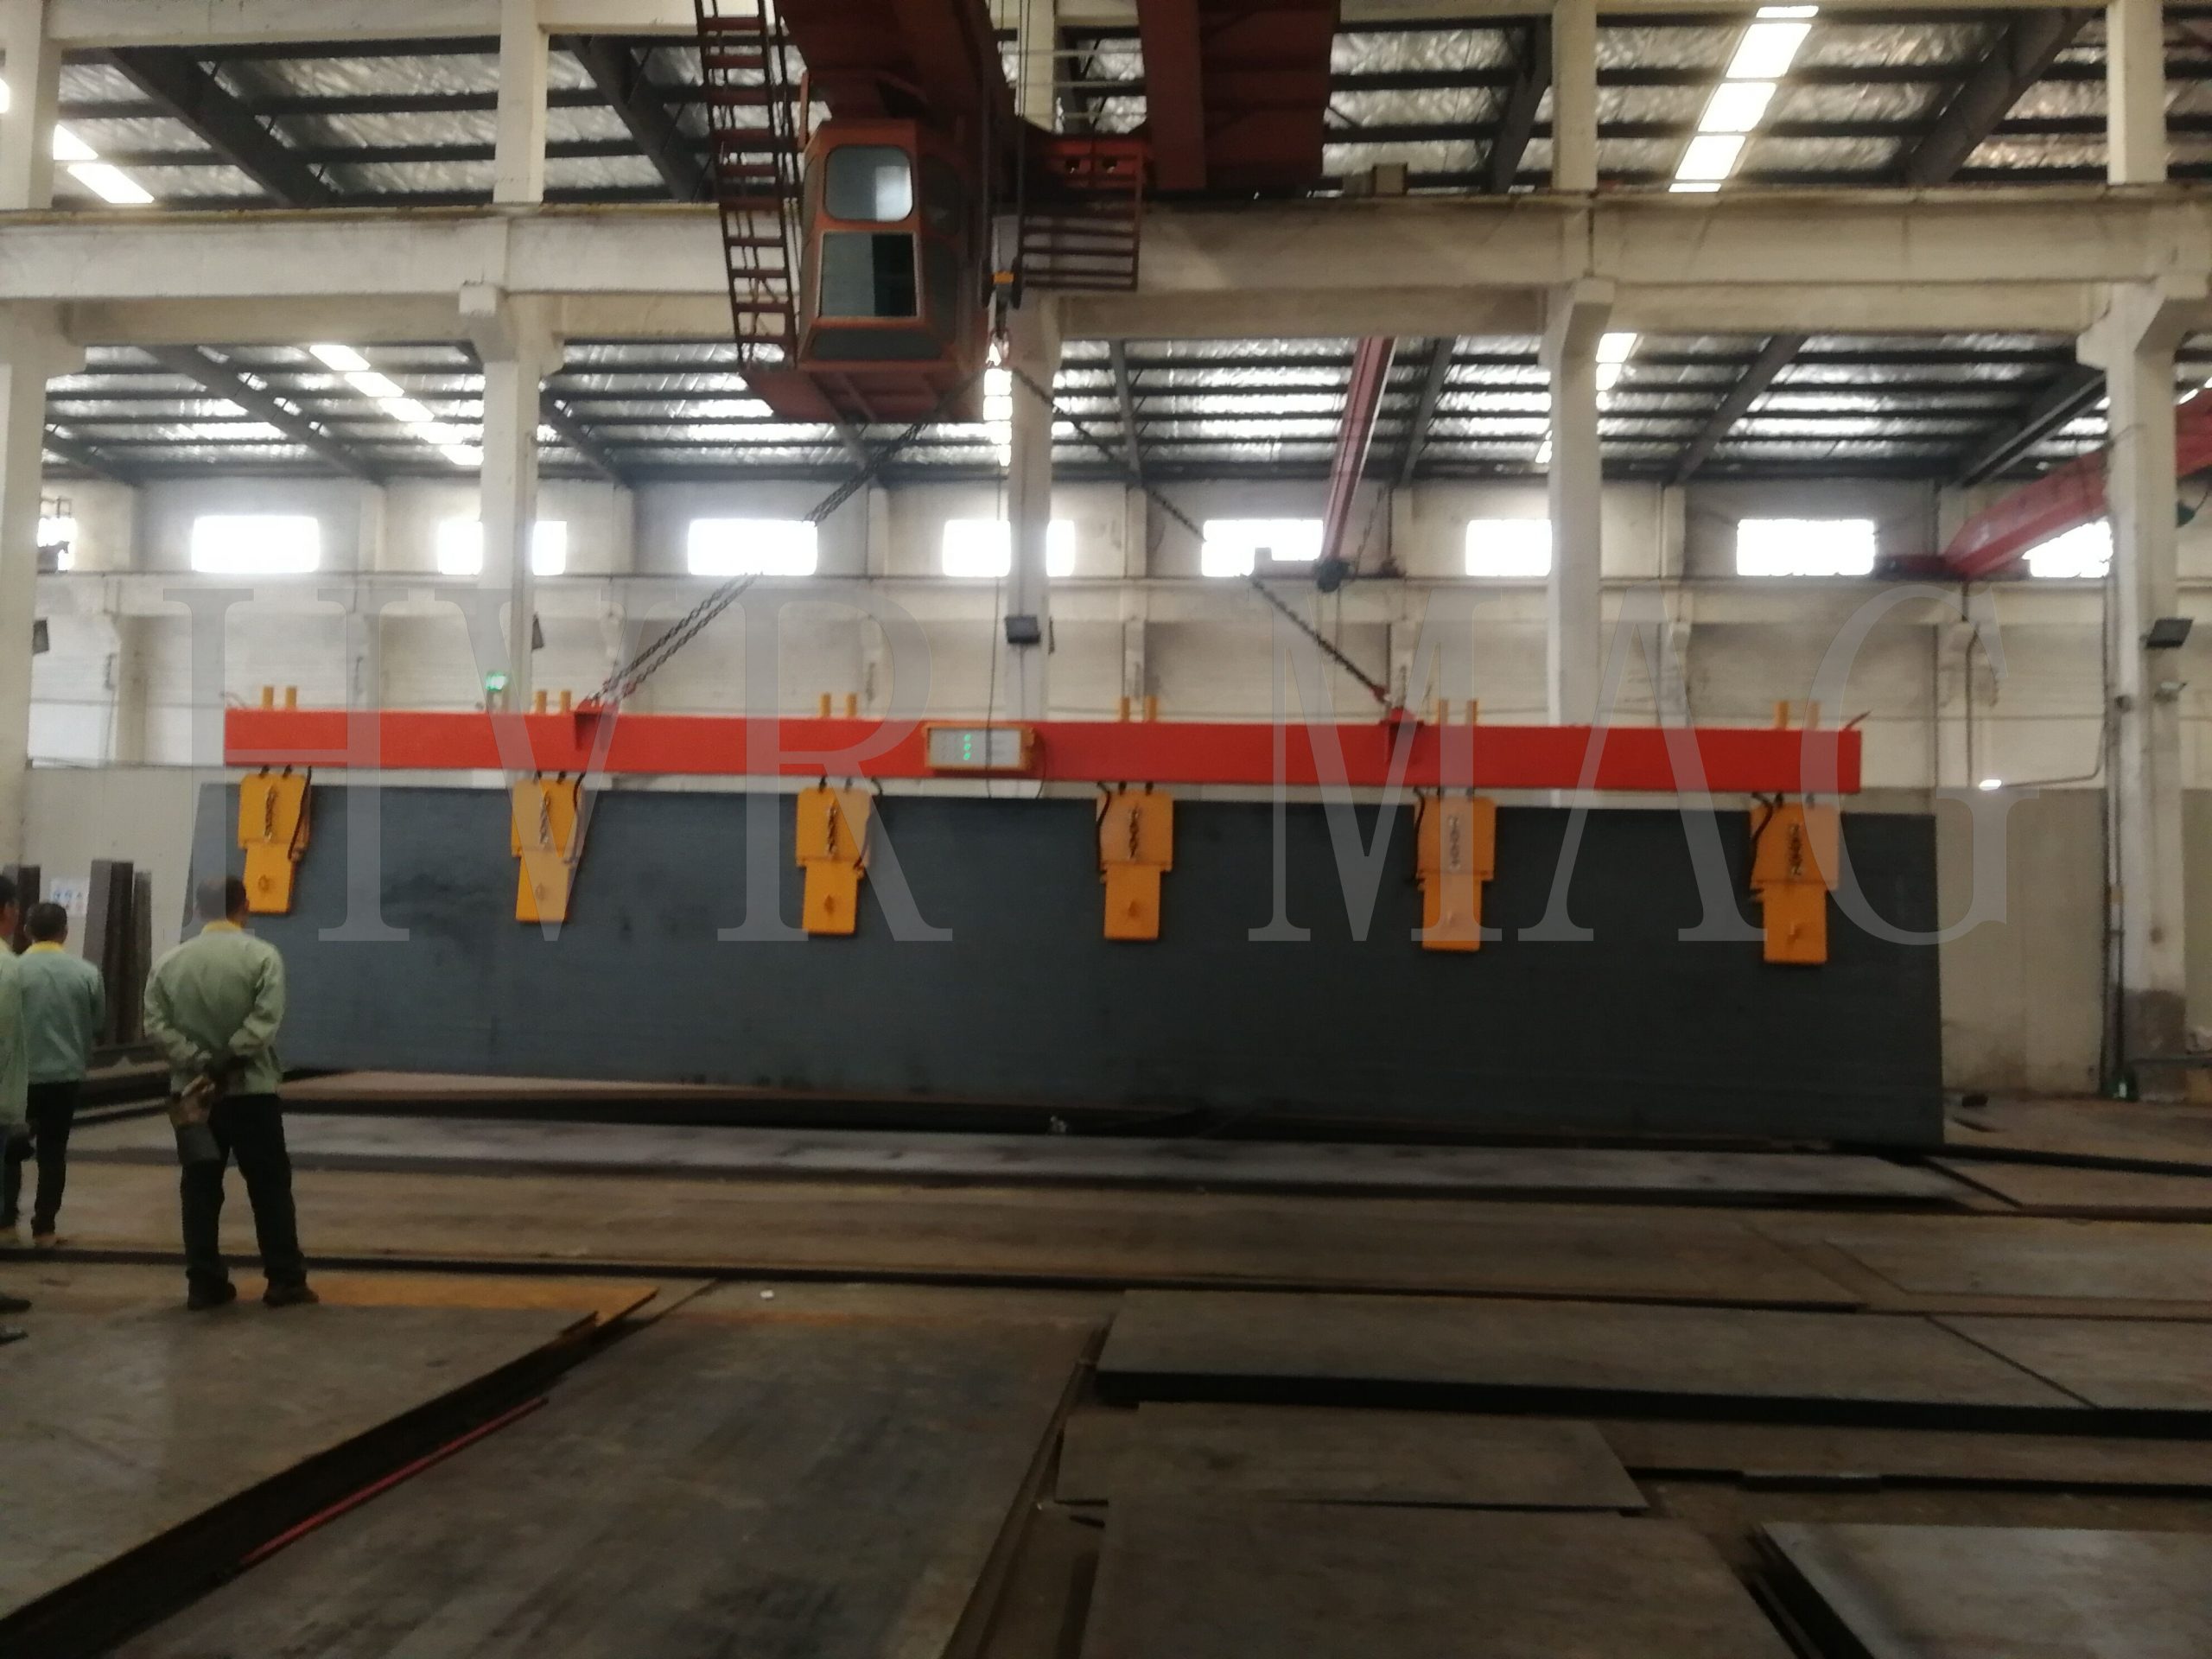 Vertical lifting of steel plate with magnets - HVR MAG